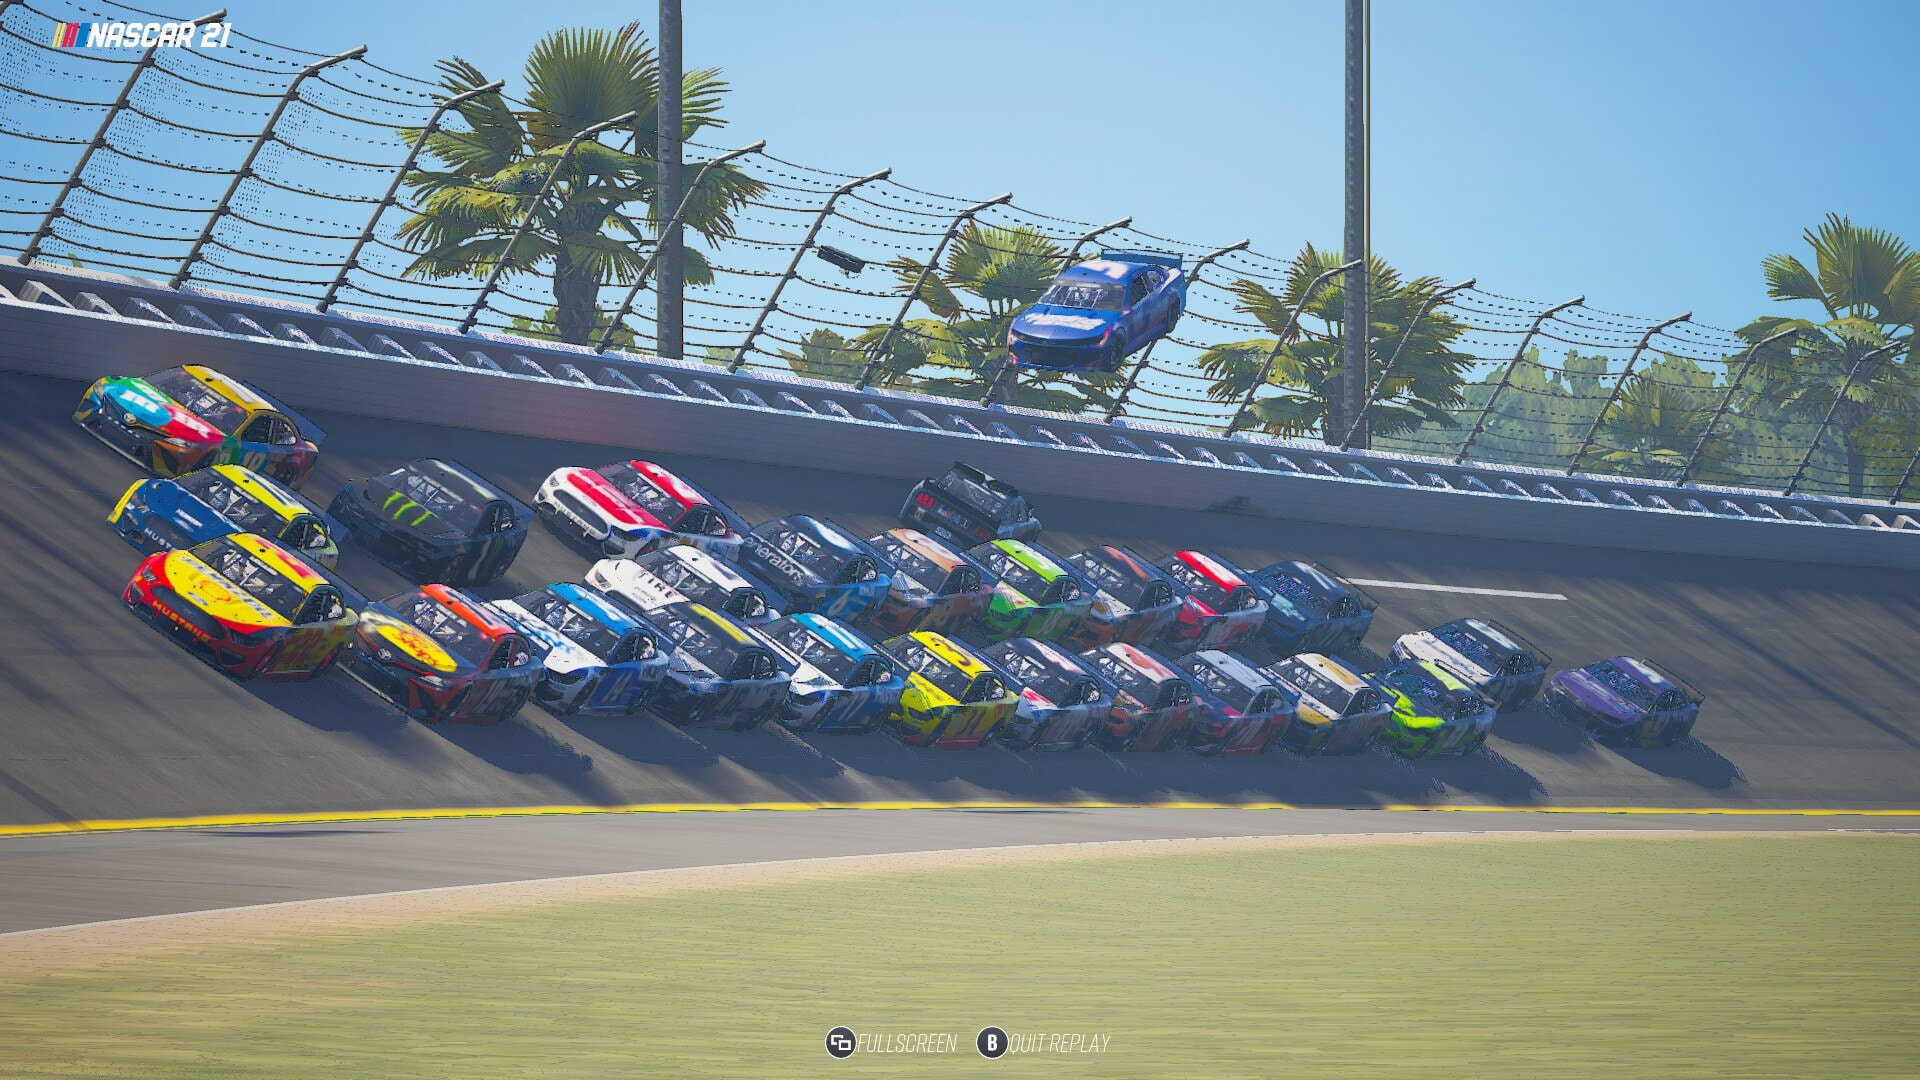 NASCAR 23 Still In Design Stage, Release In Question